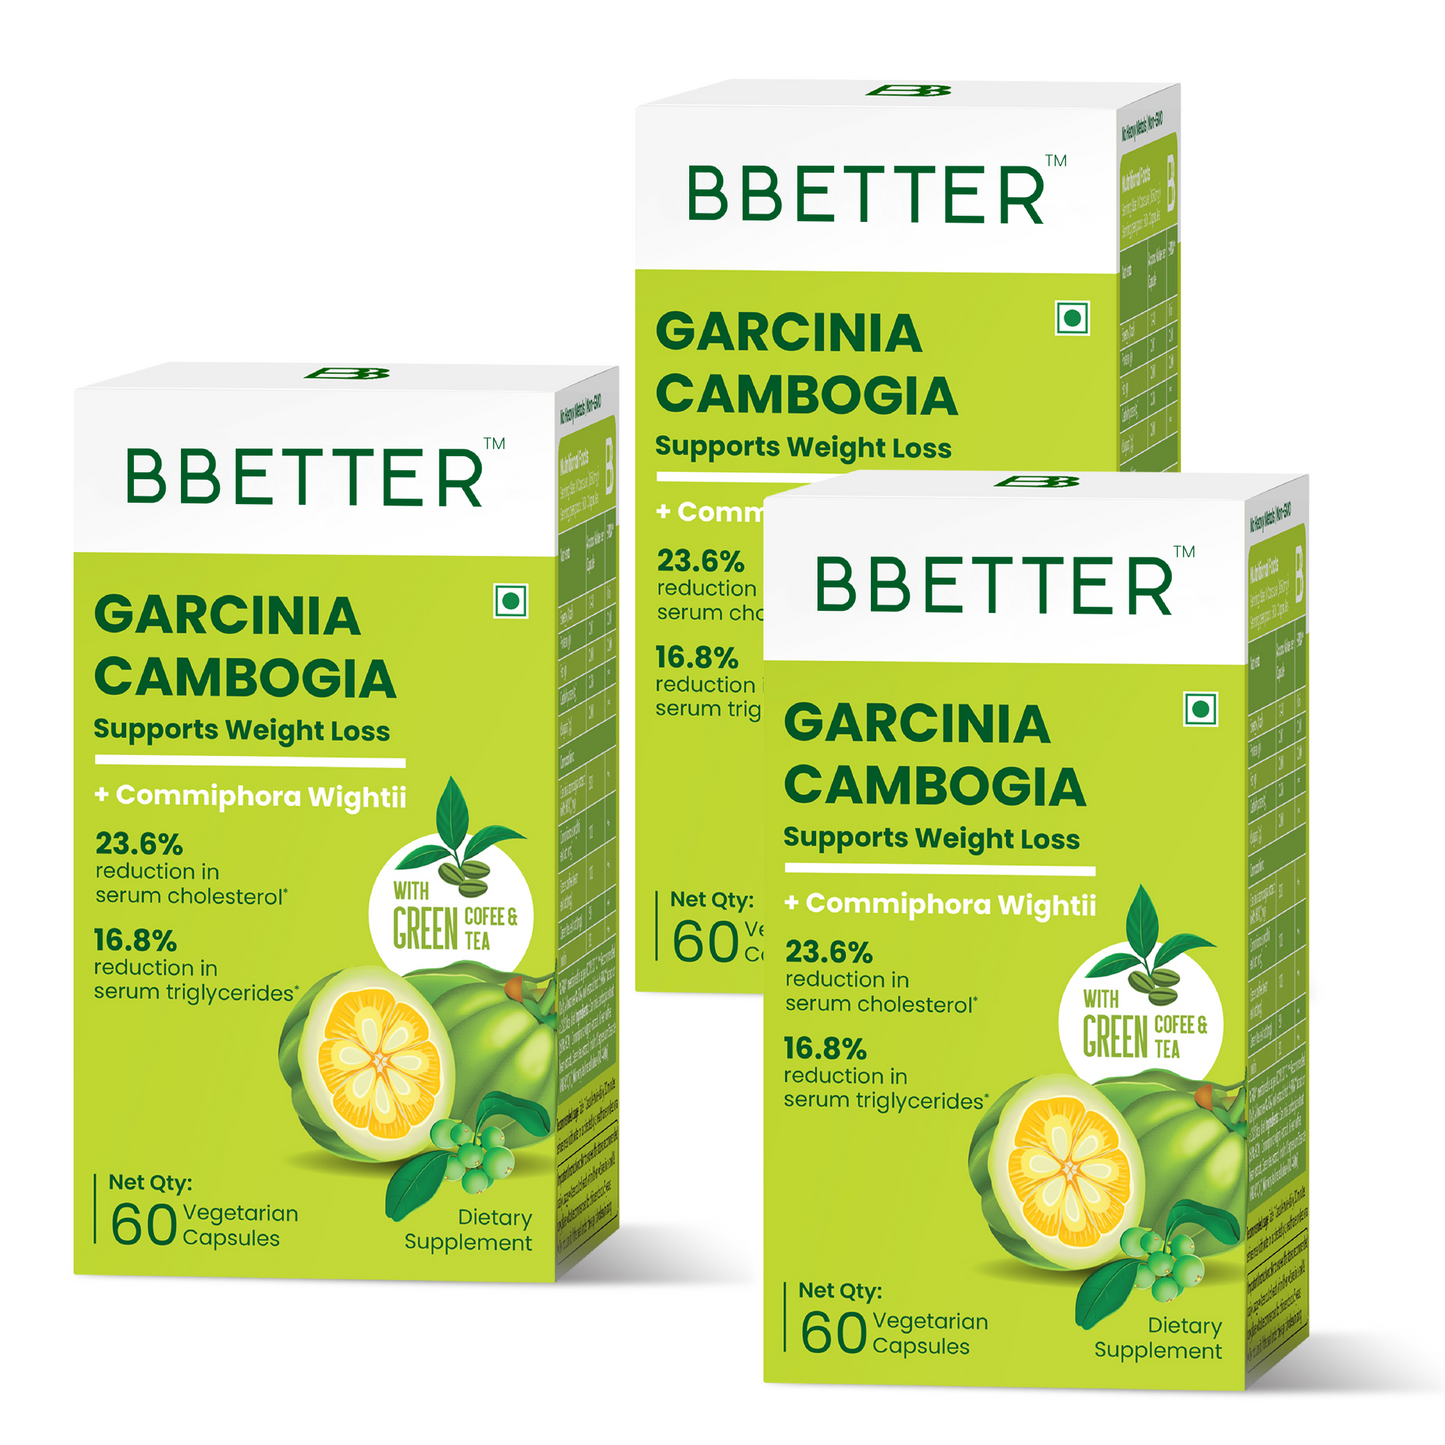 BBETTER Garcinia Cambogia With Ayurvedic Herbs - 3 Month Supply